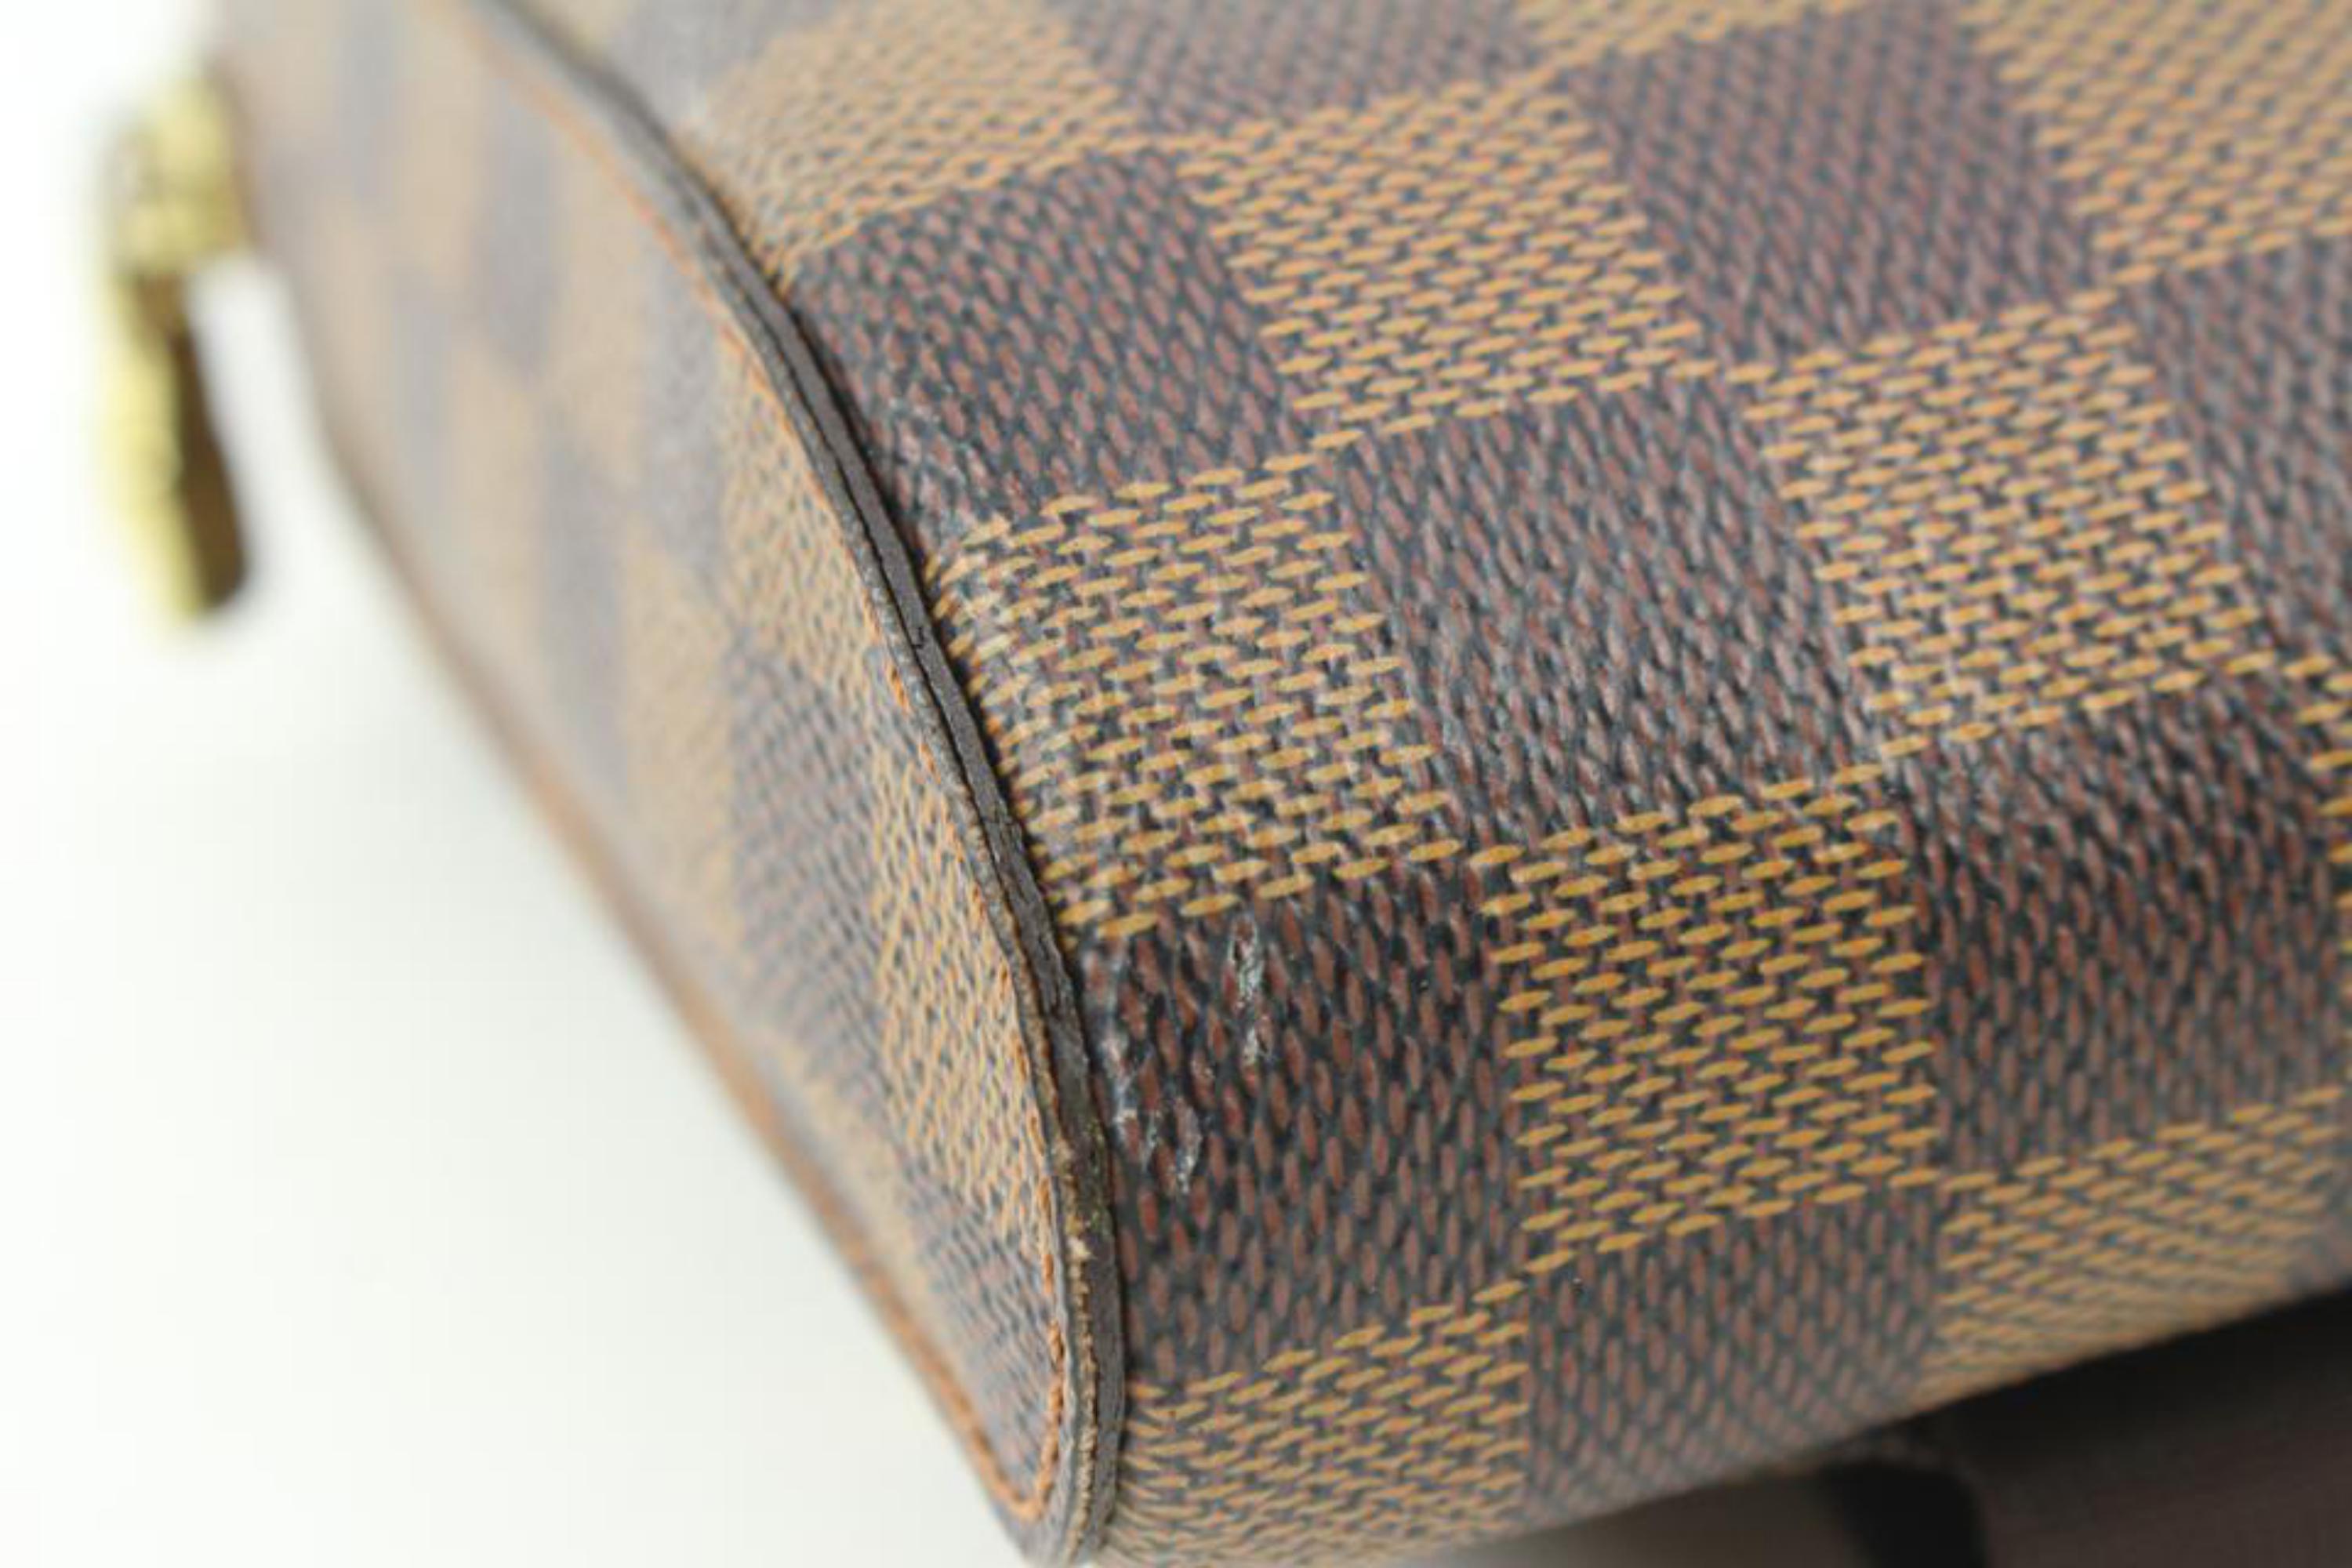 Louis Vuitton Damier Ebene Geronimos Body Bag Waist Pouch 119lv49 In Good Condition For Sale In Dix hills, NY